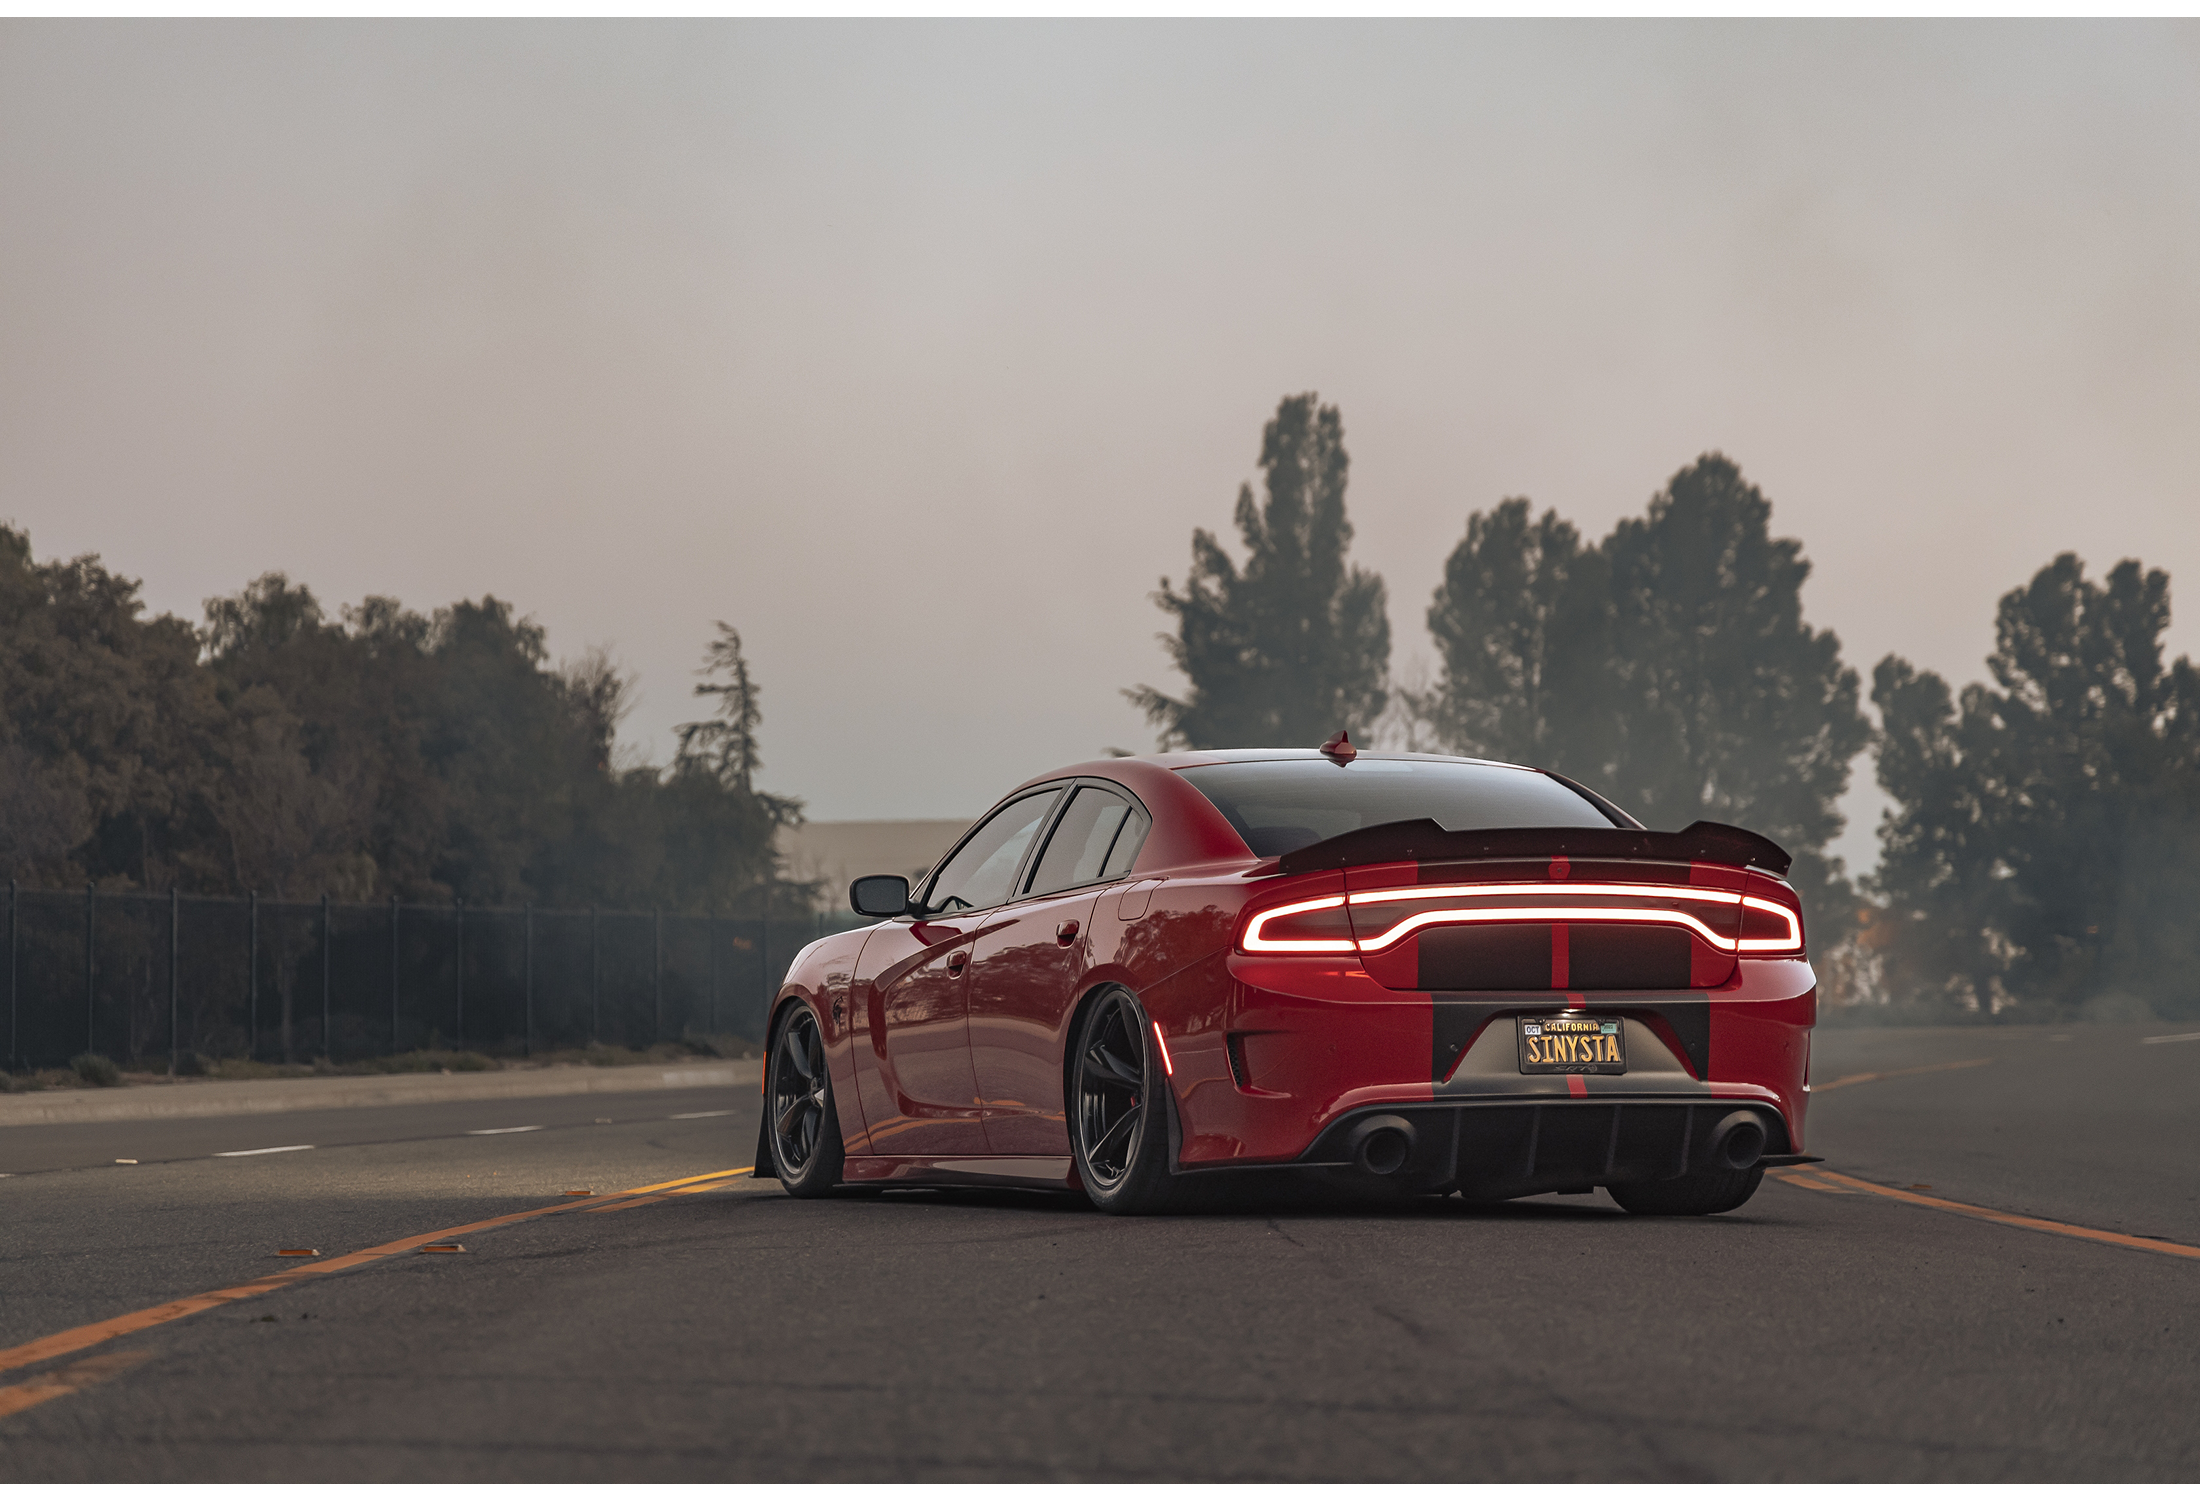 2022 Dodge Charger Hellcat